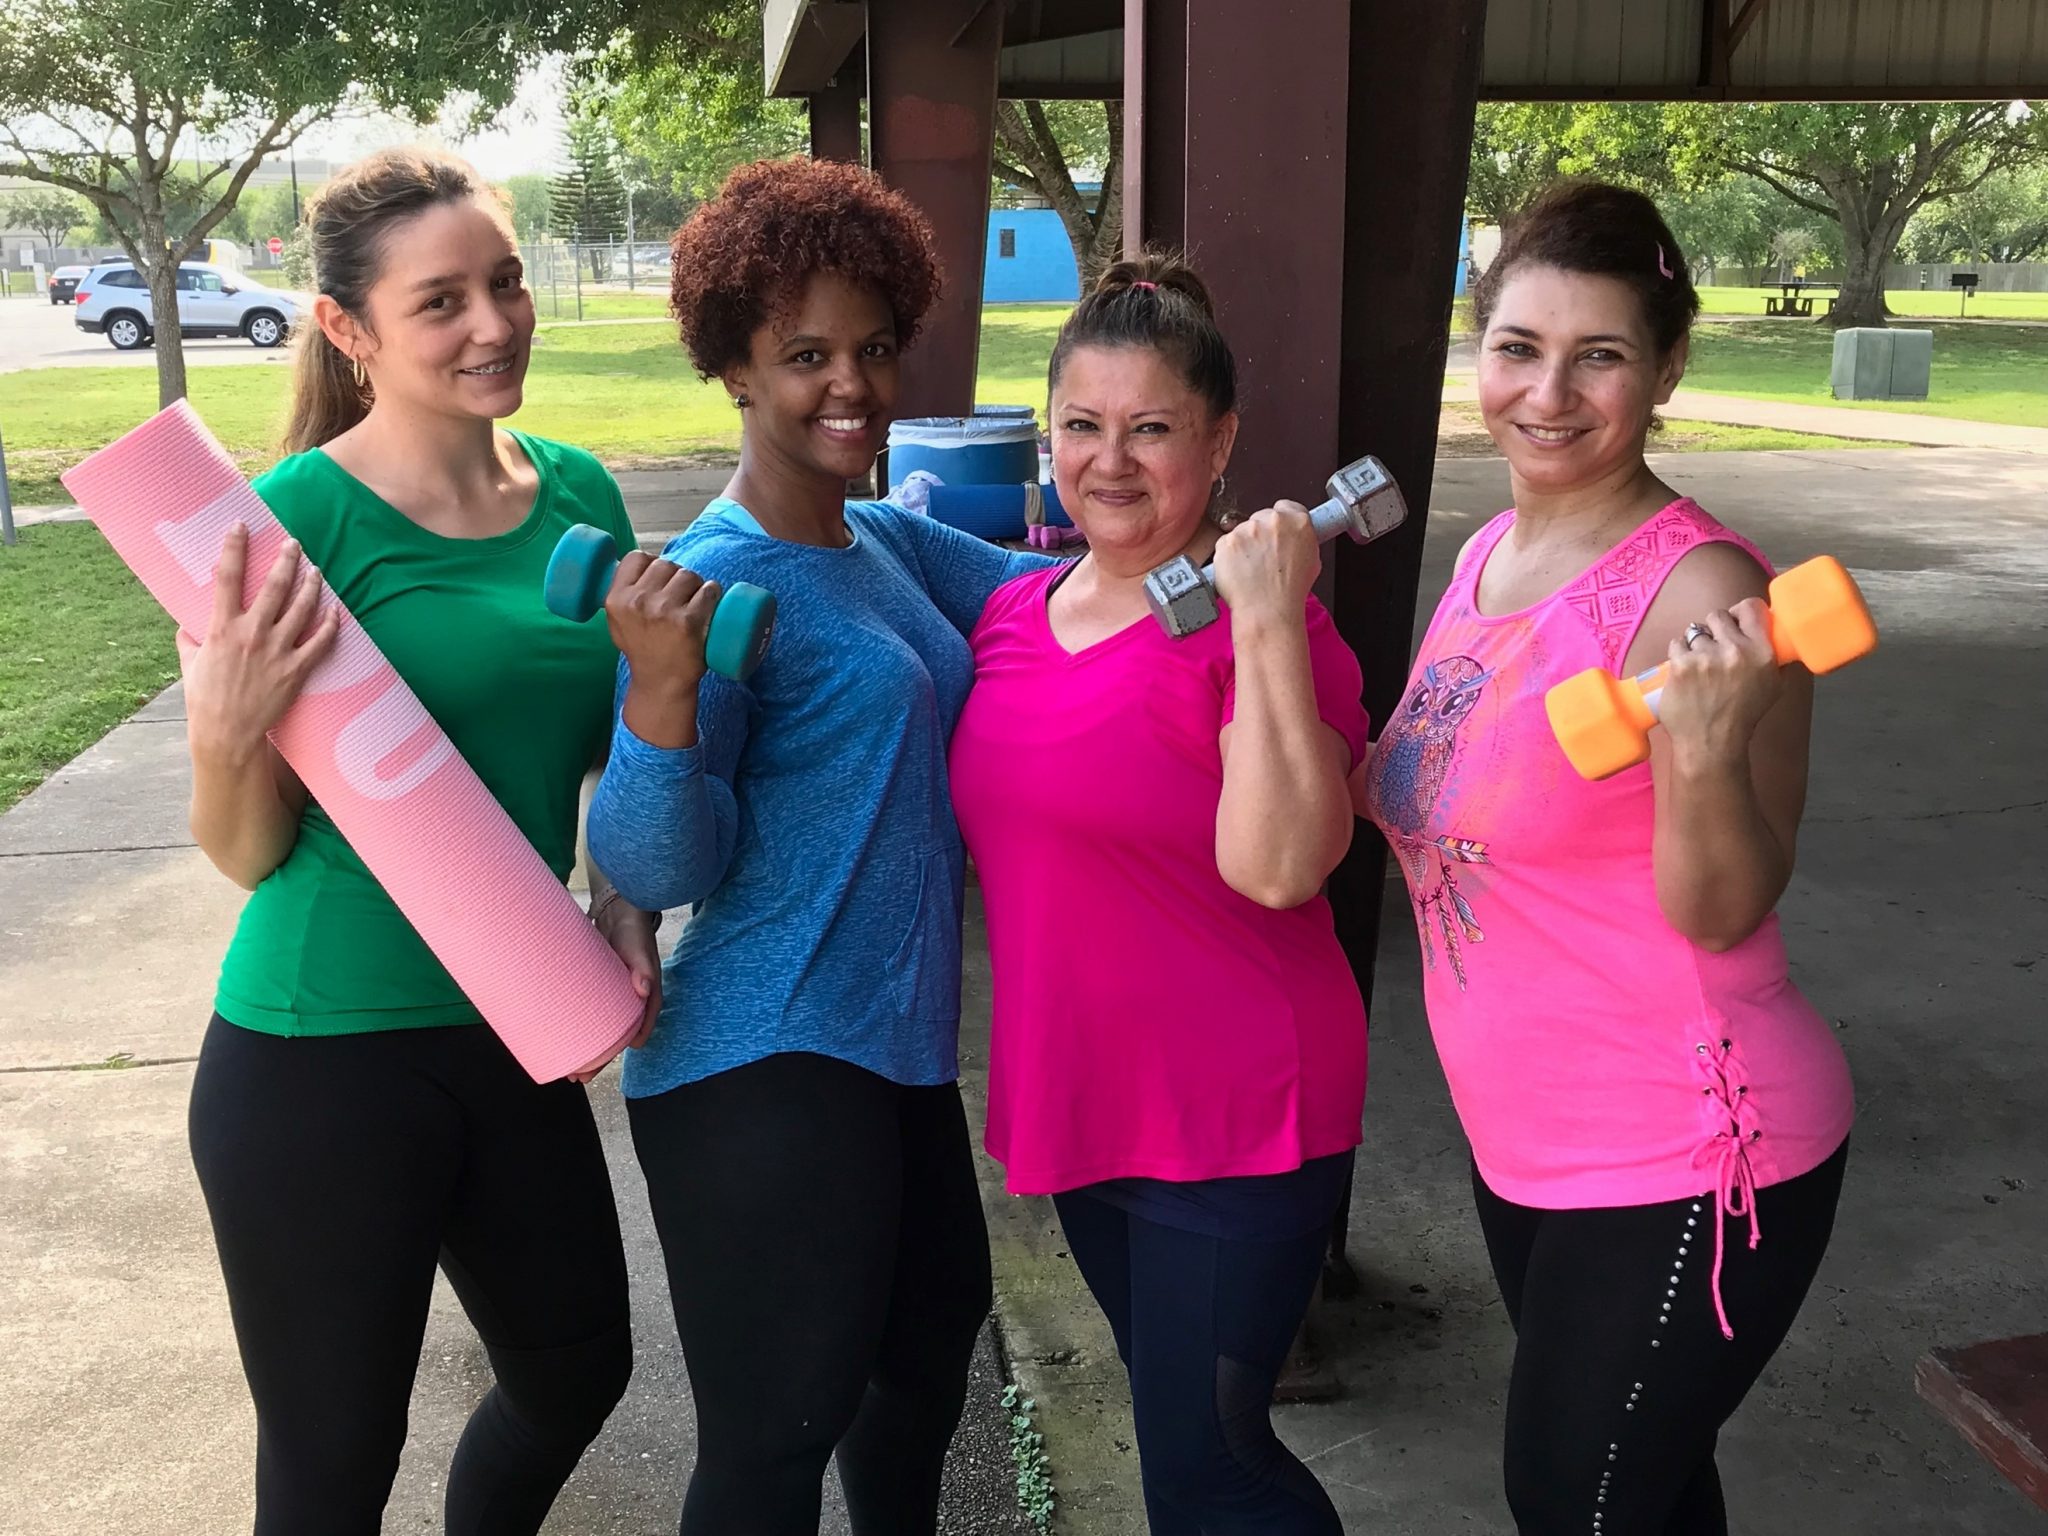 A group of women flexing and posing for a photo during an outdoor exercise class